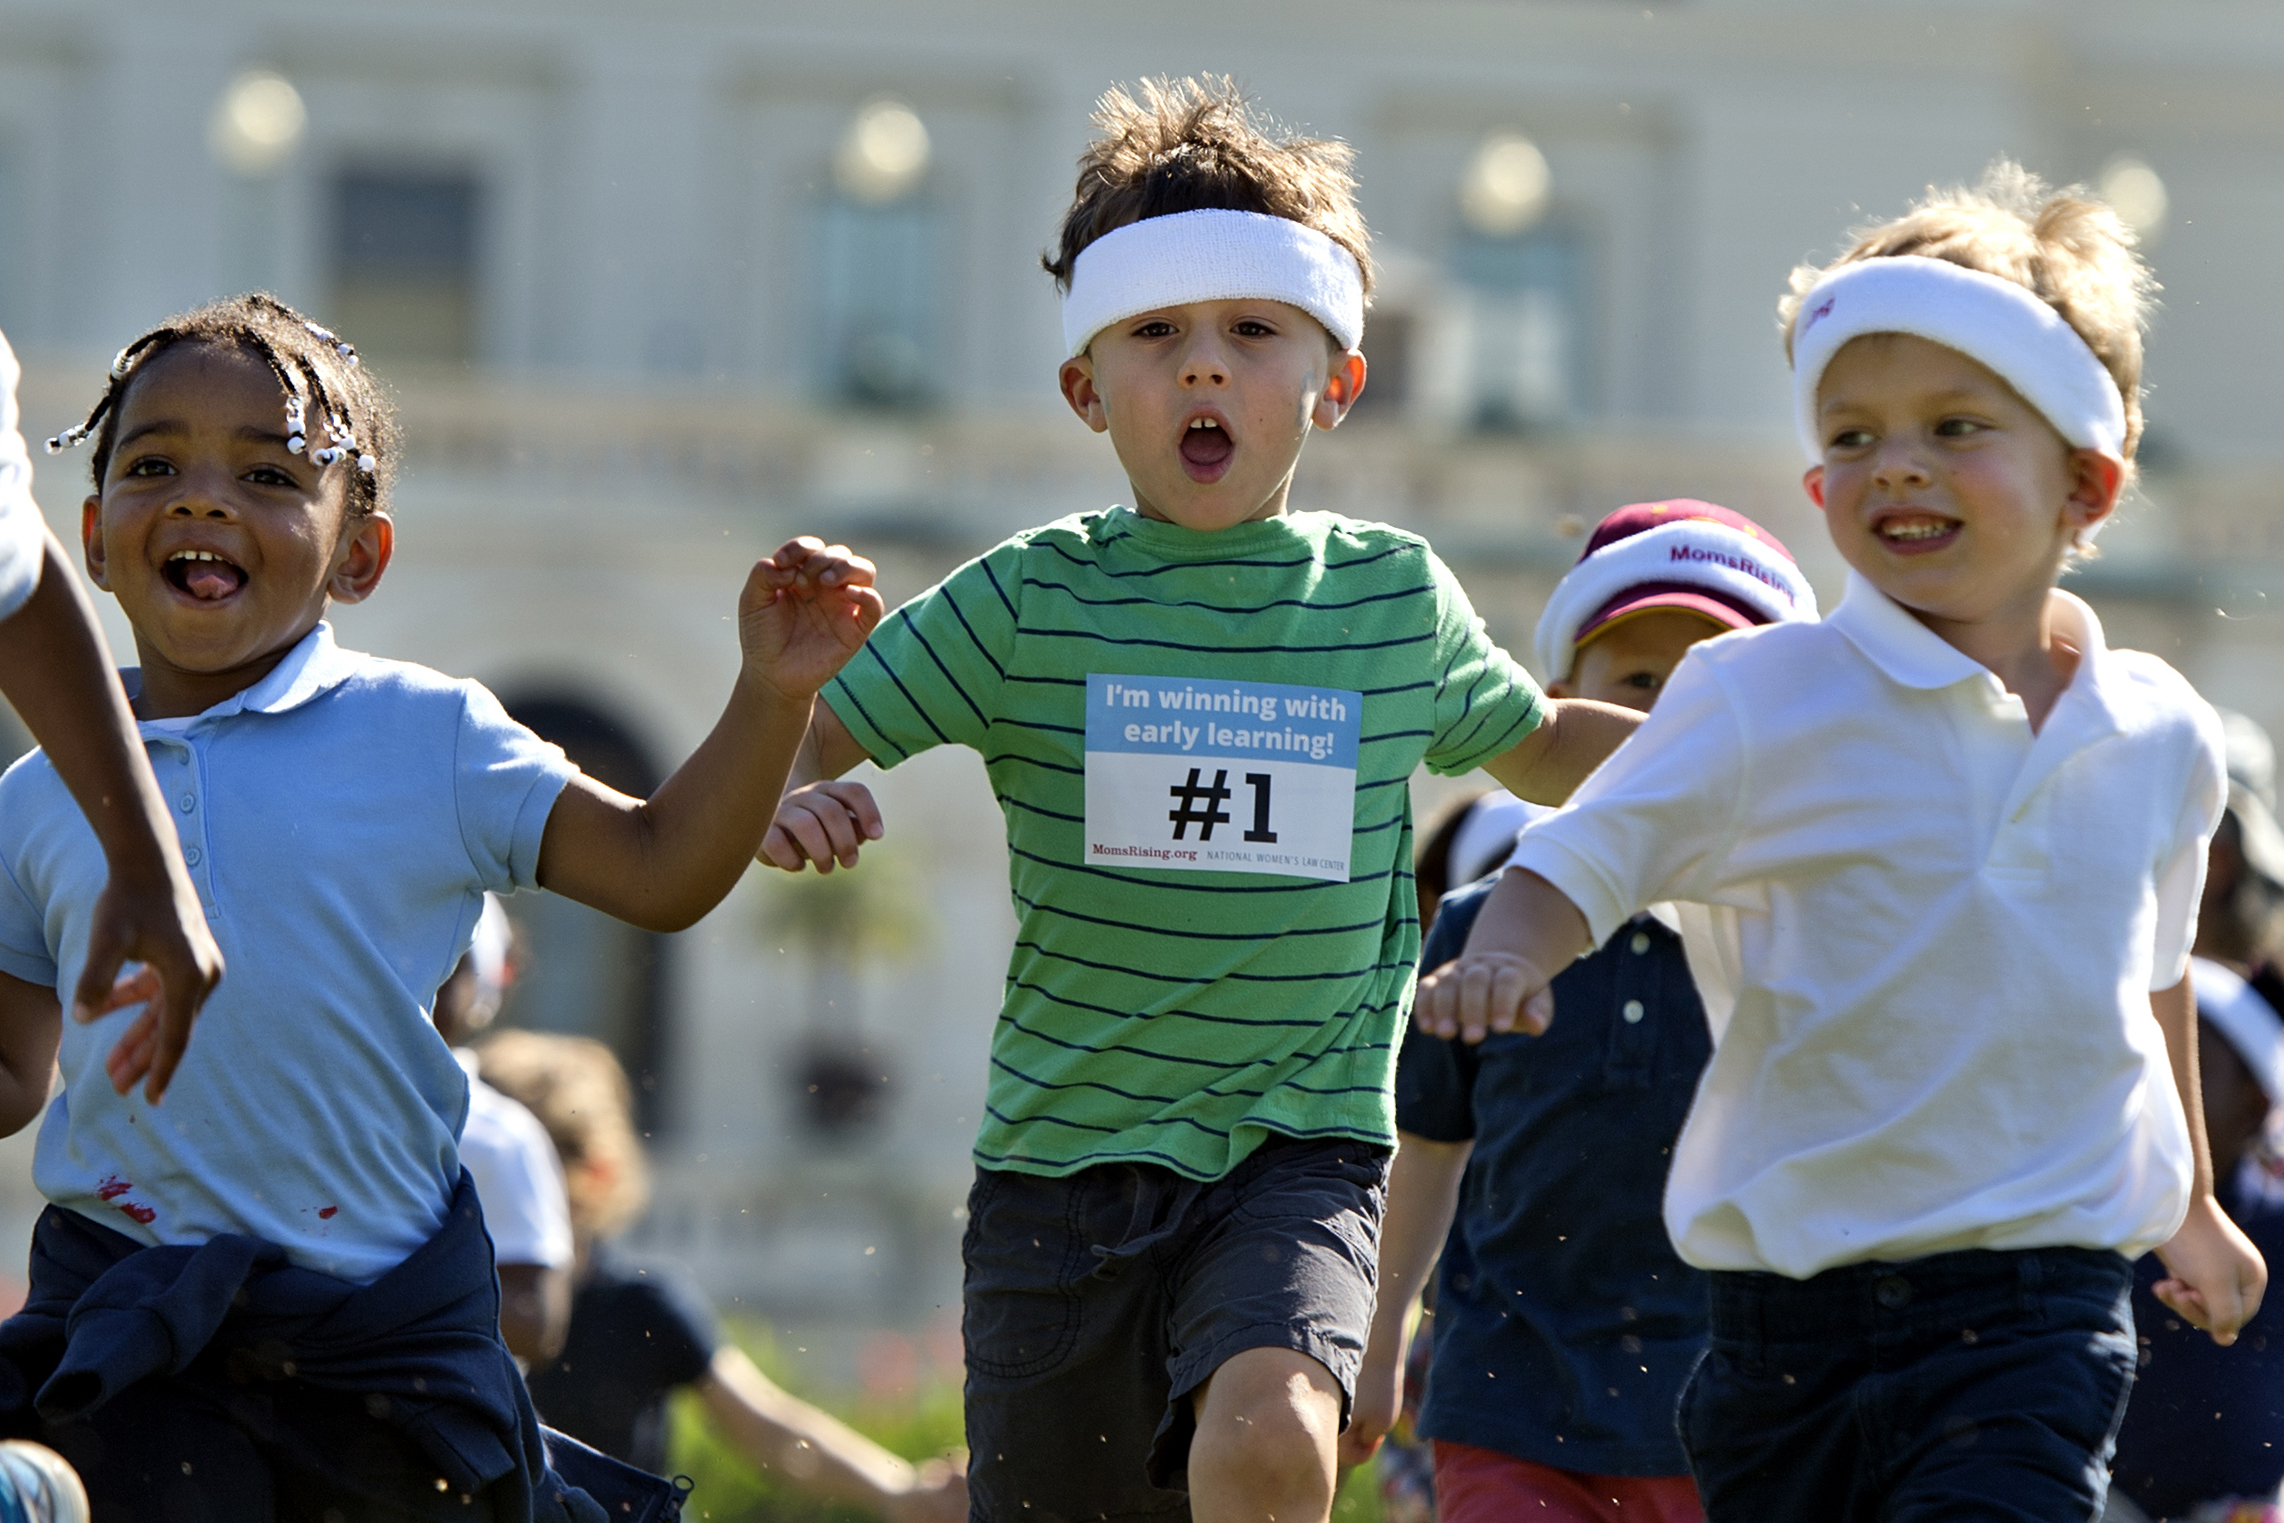 Children run a relay race during an event to highlight the importance of affordable child care and early learning programs on Sept. 17, 2015.